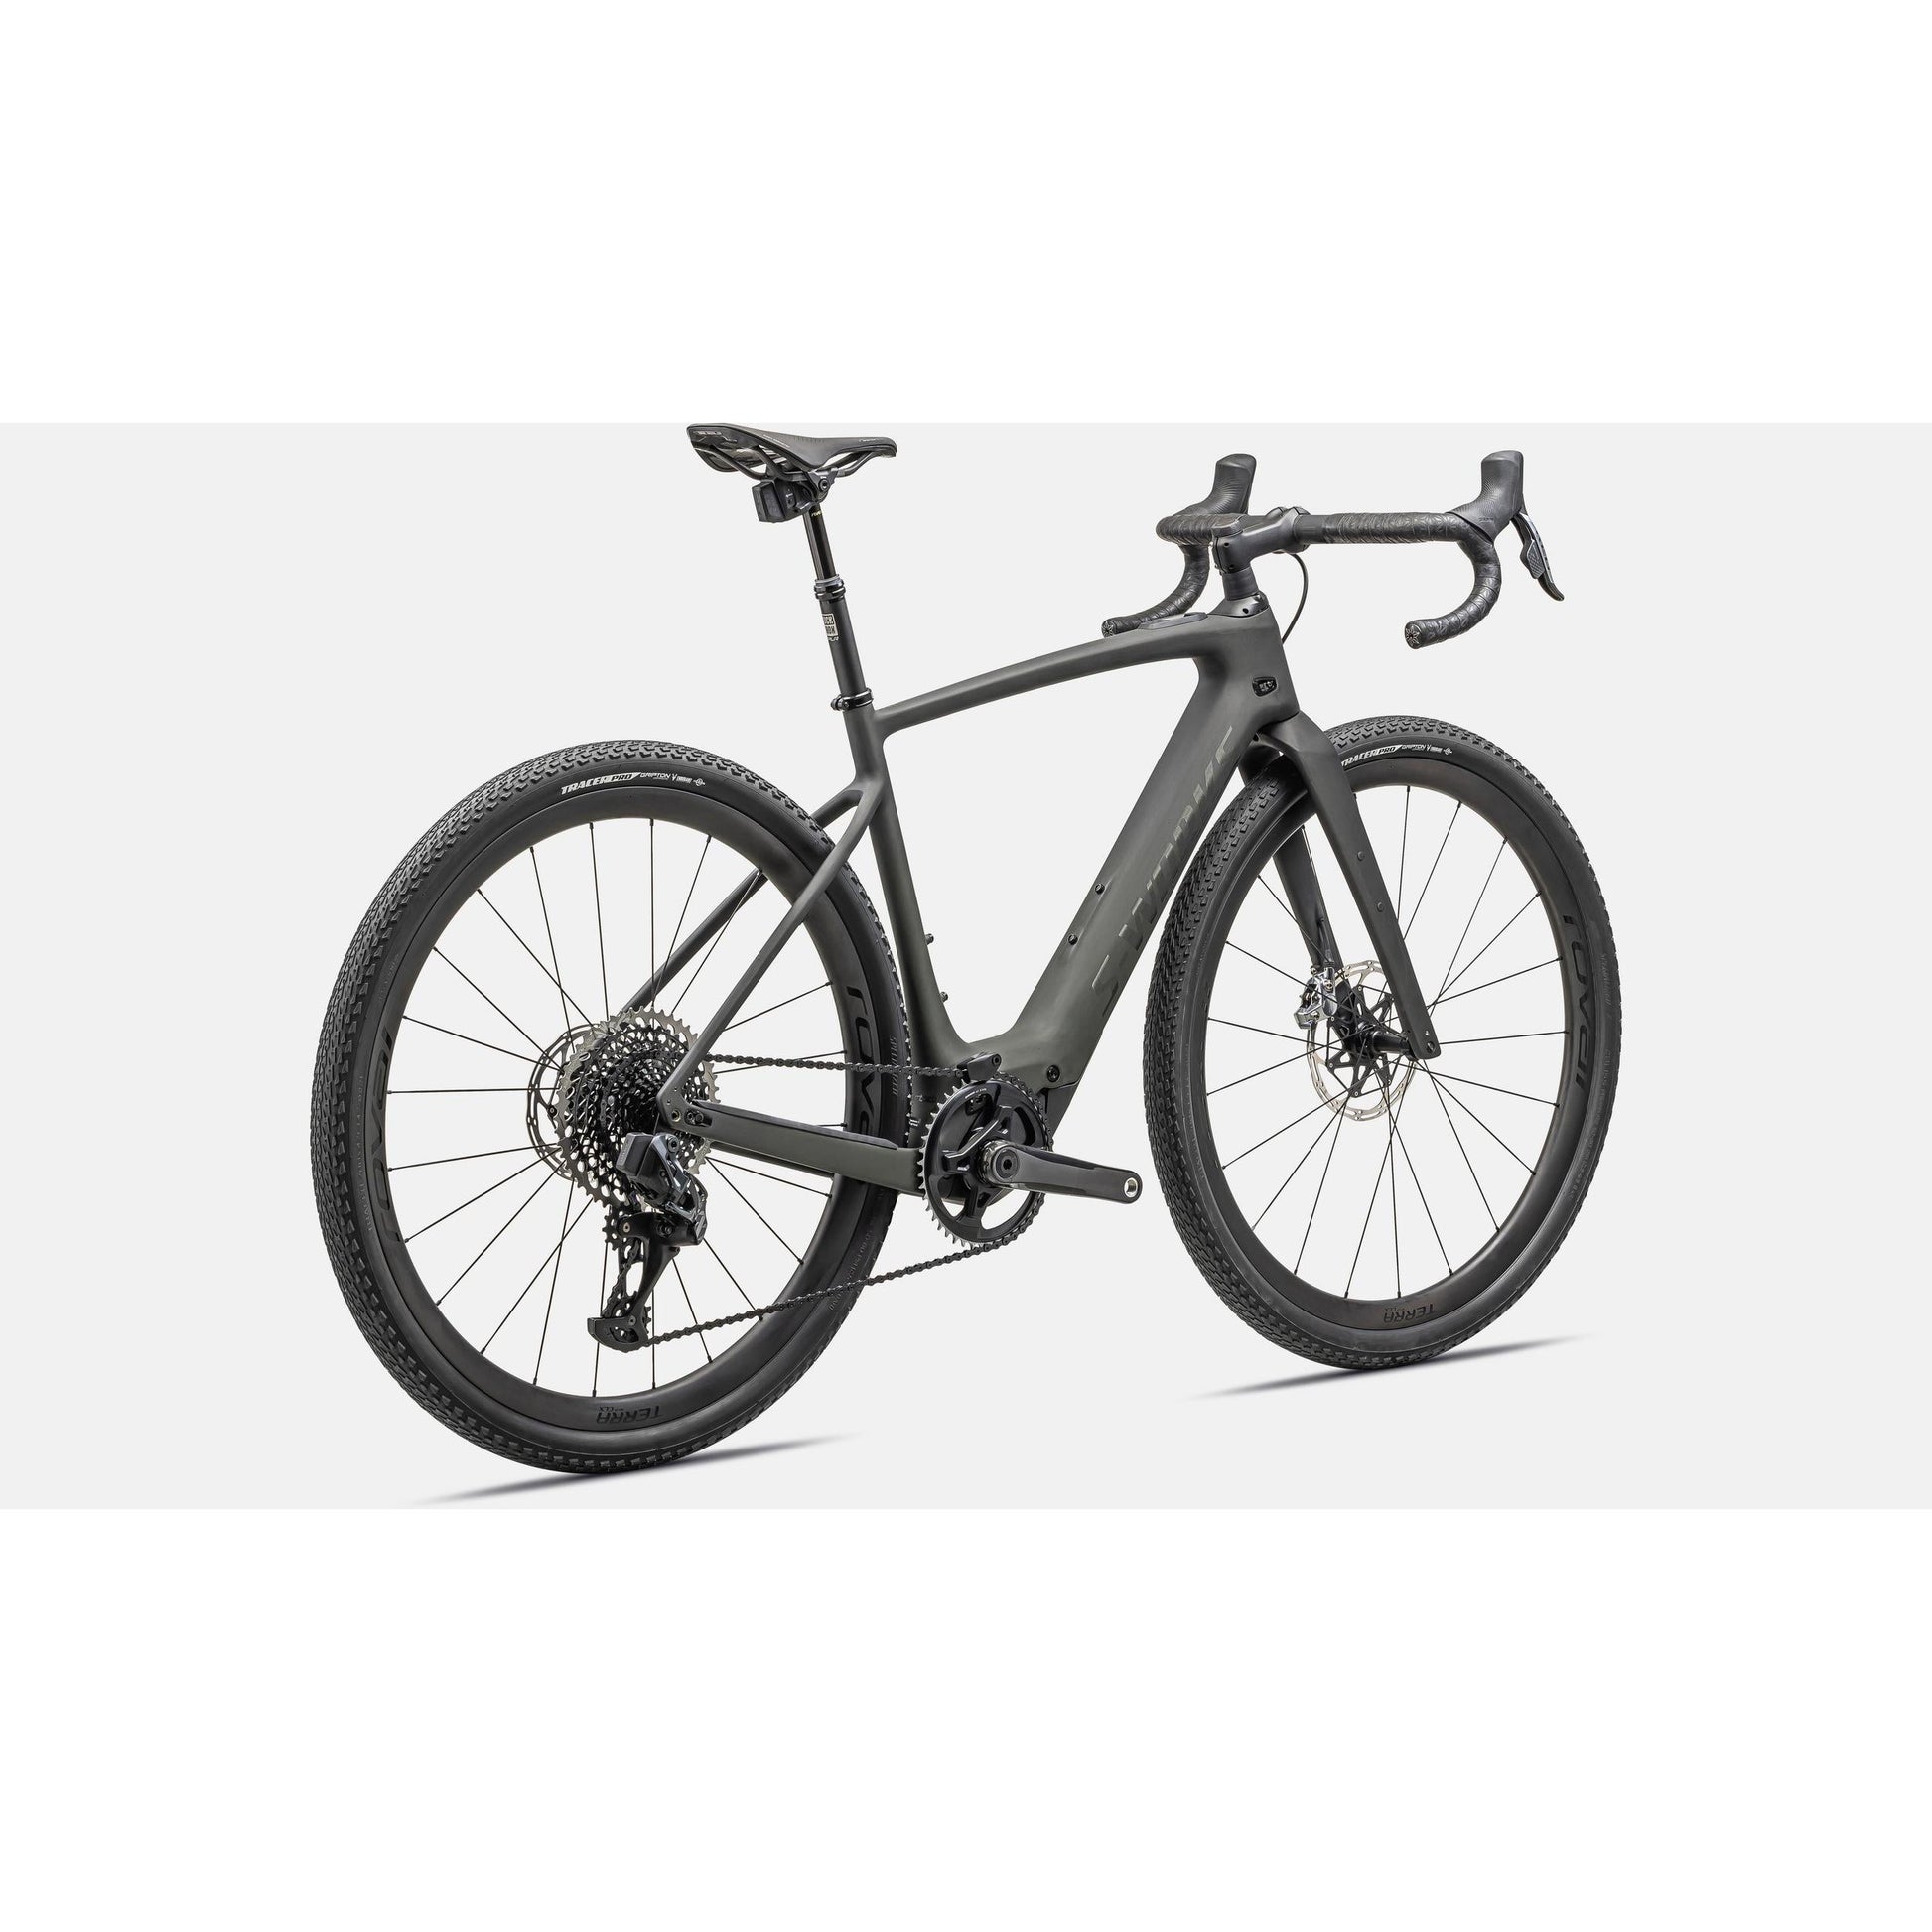 Specialized S-Works Turbo Creo 2 Electric Road Bike - Bikes - Bicycle Warehouse